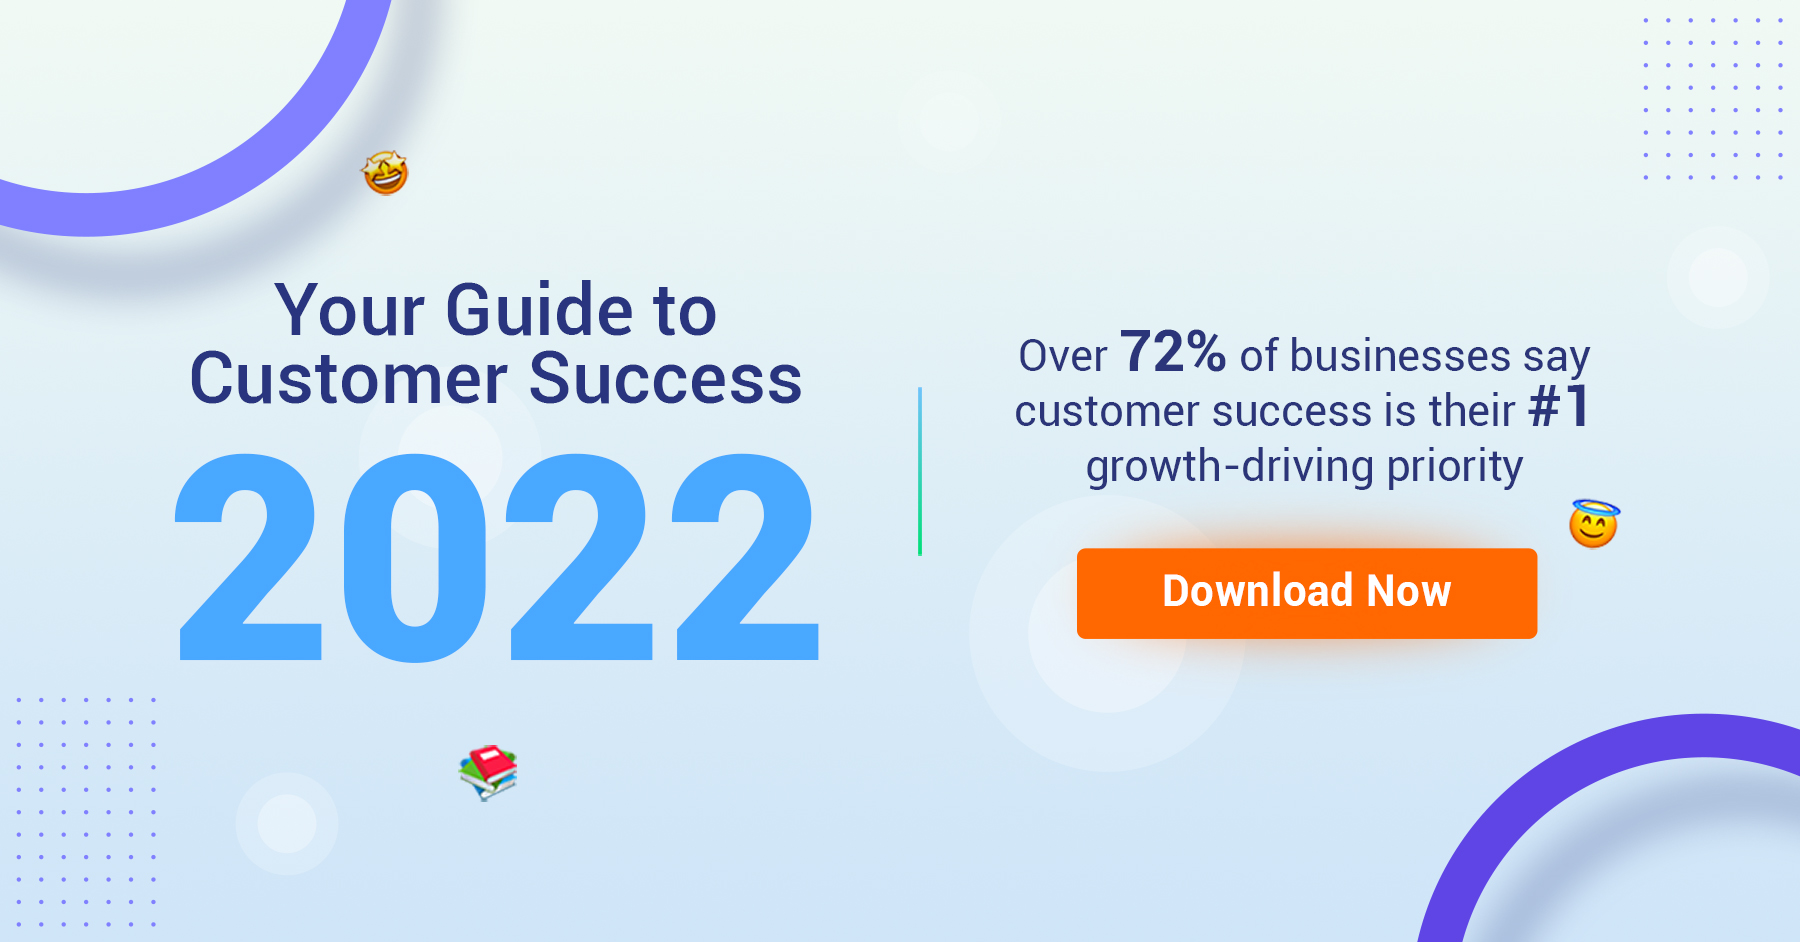 B2B FB Your Guide to customer success in 2022